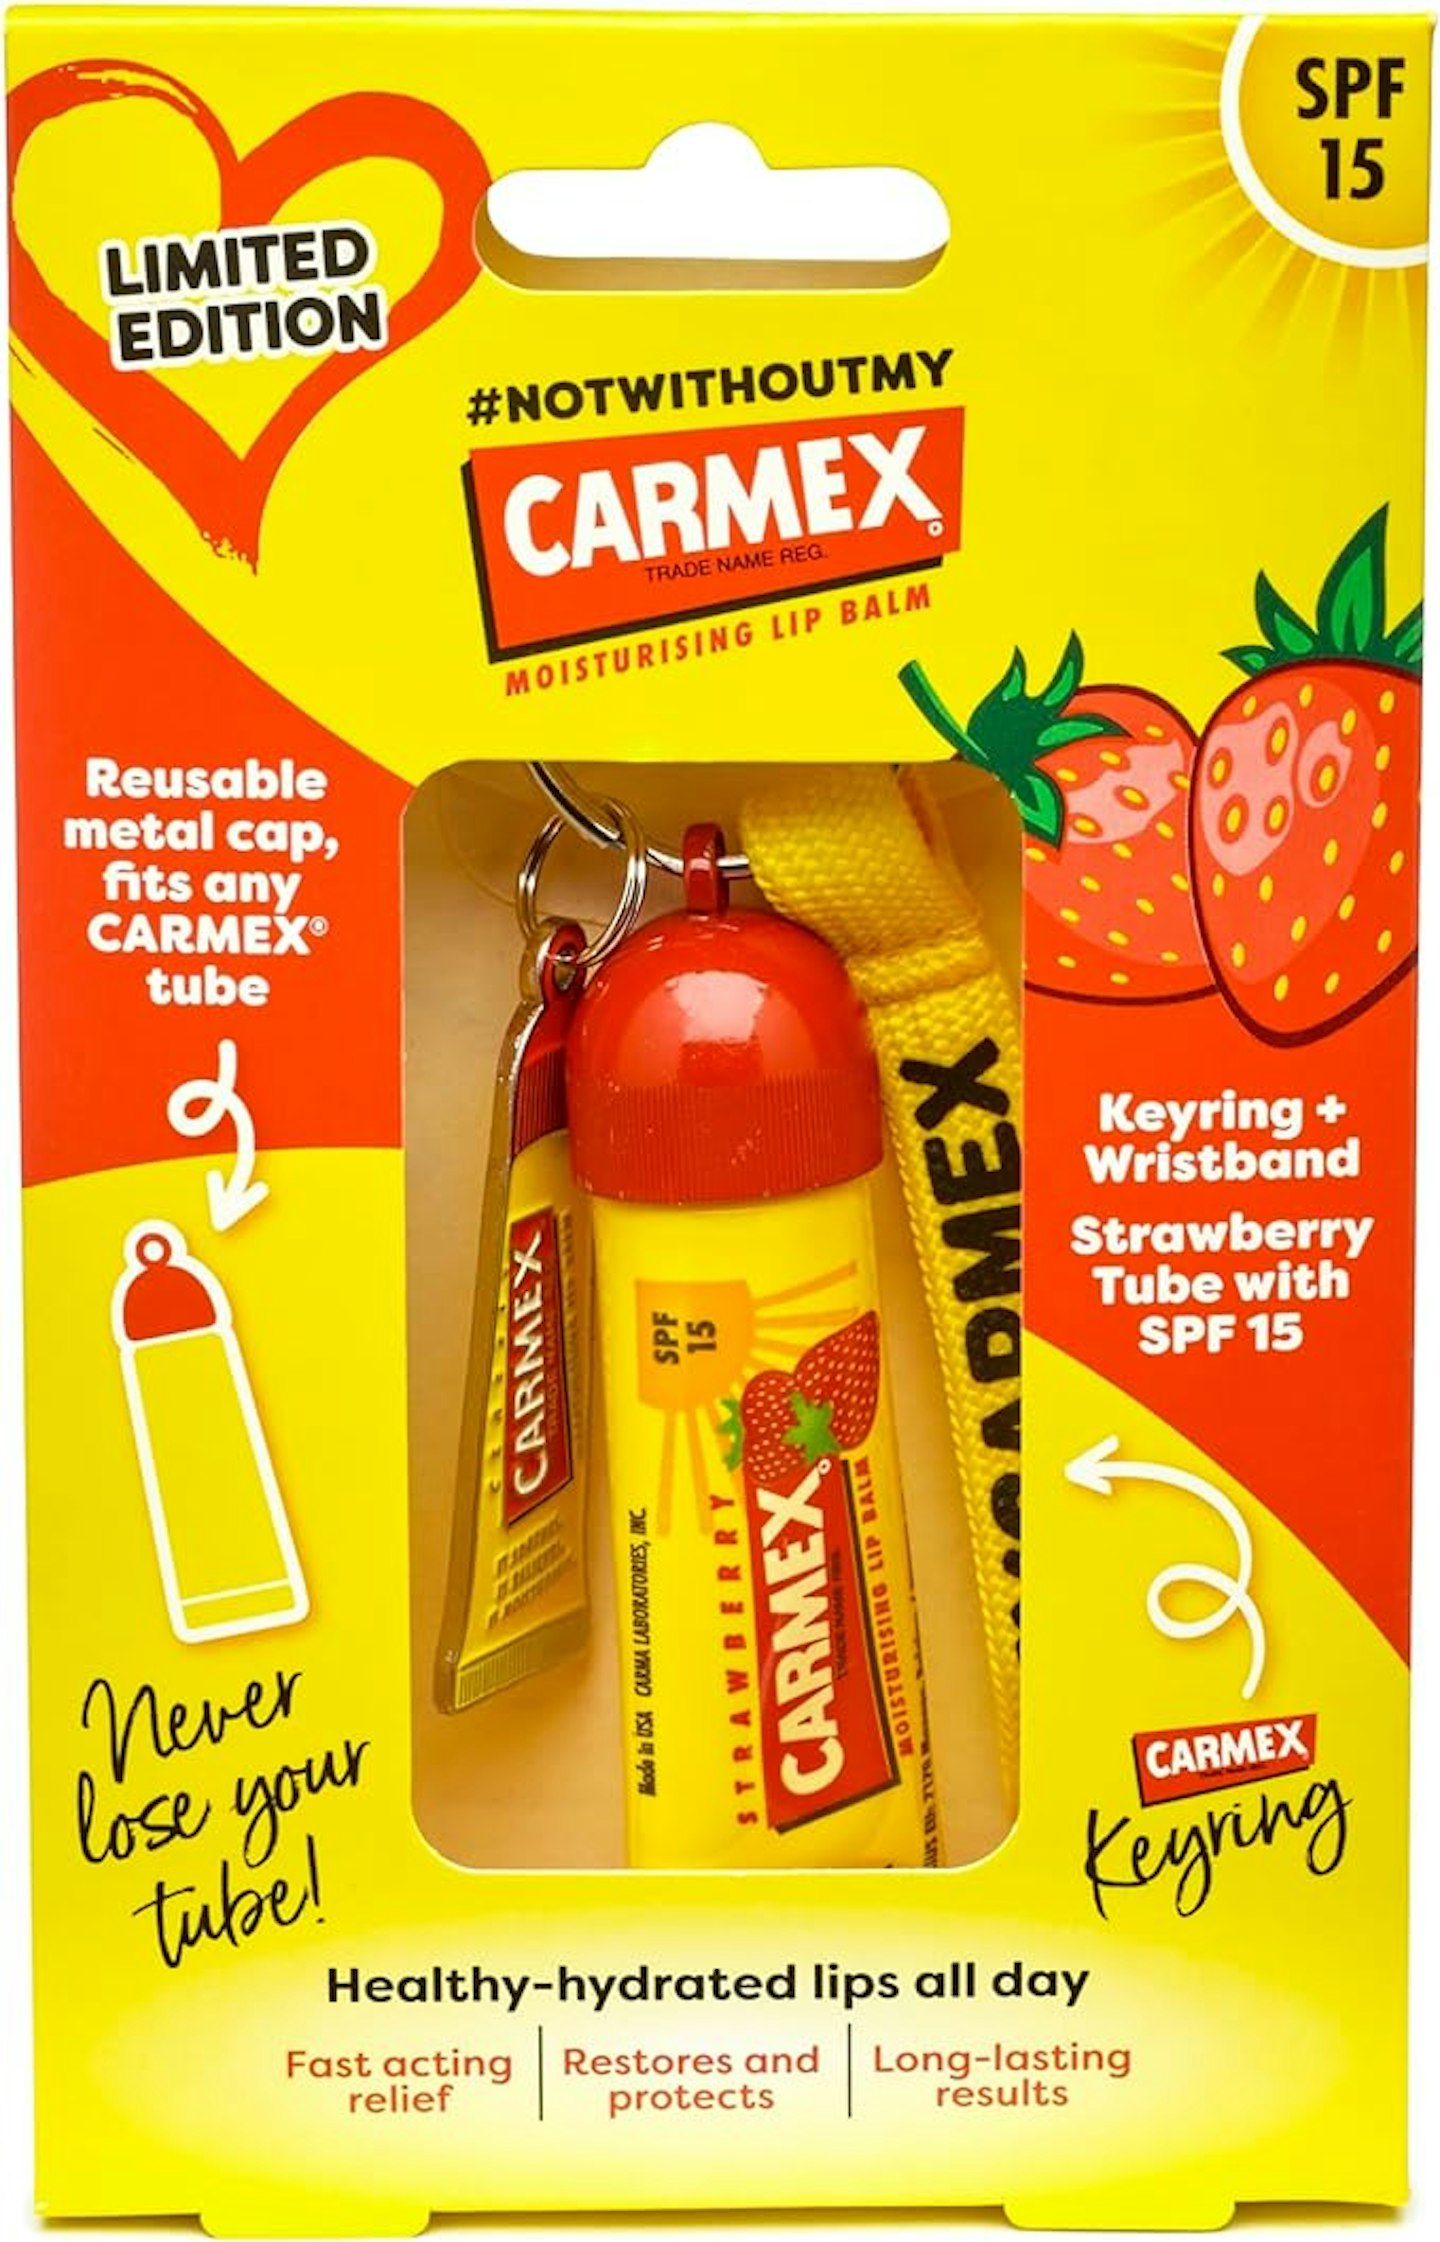 CARMEX - small gifts for mums